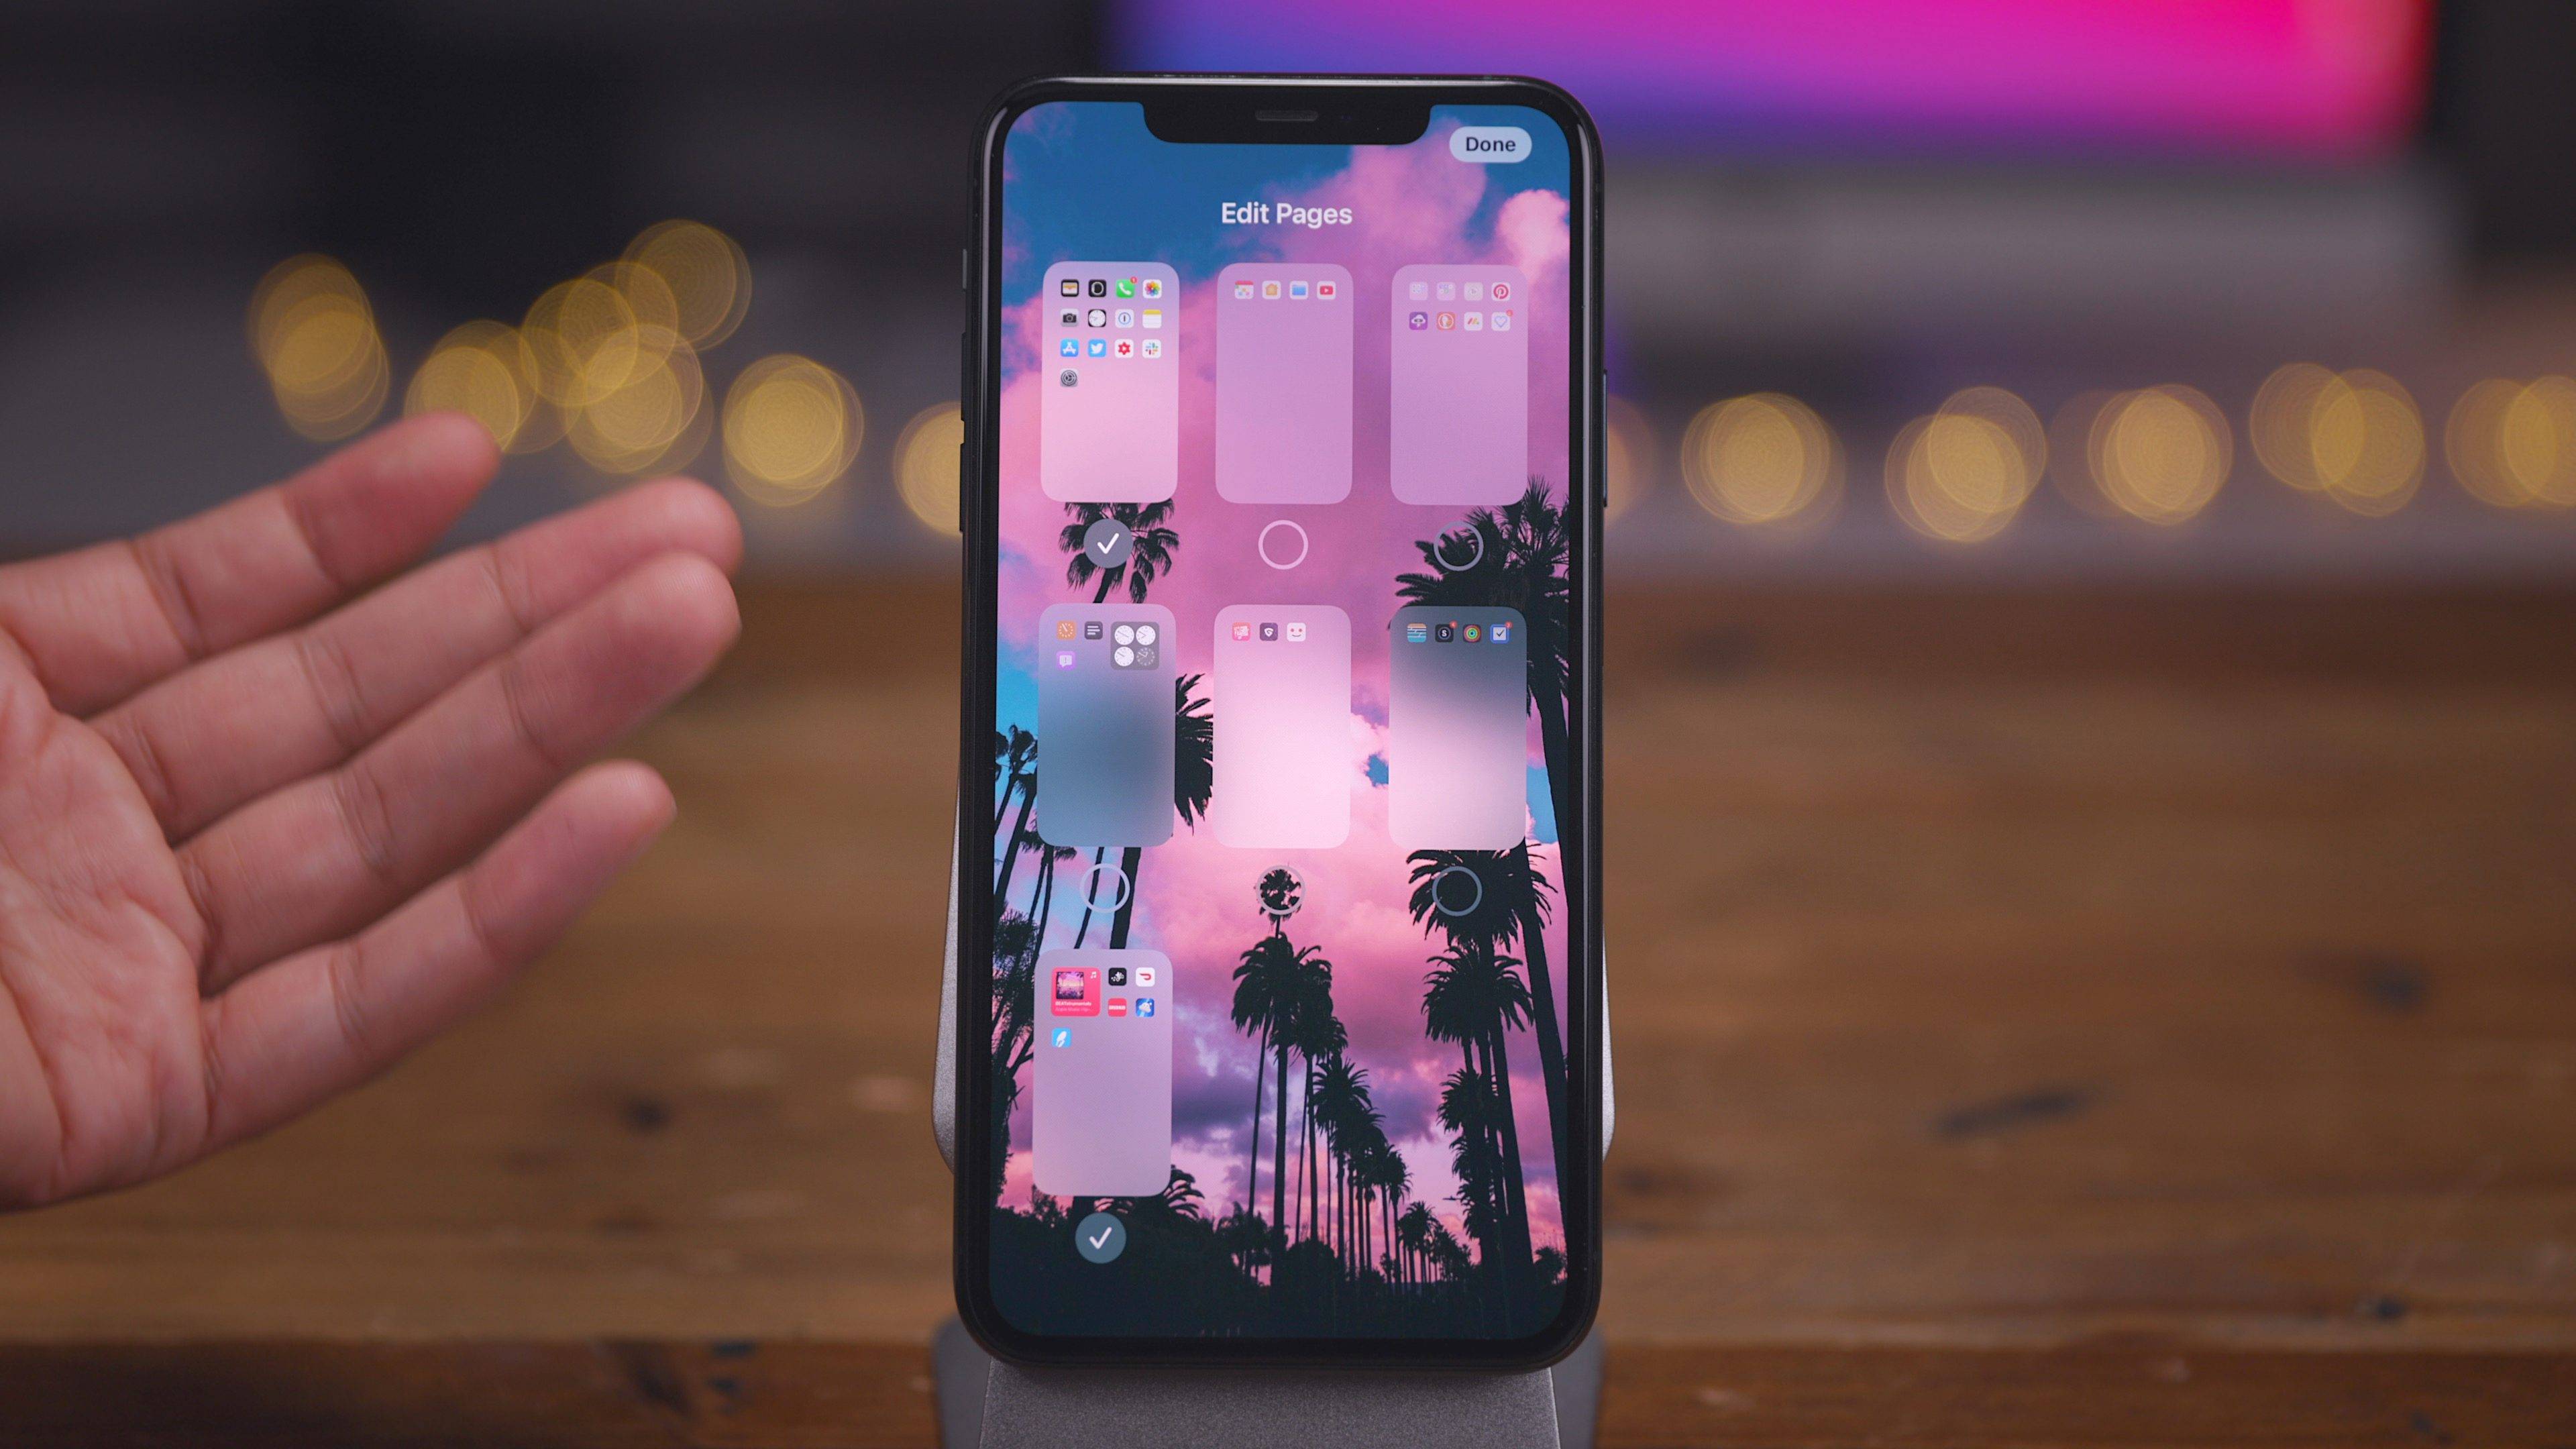 iOS-14-Home-Screen-tips-and-tricks-How-to-edit-Home-screen-pages-1